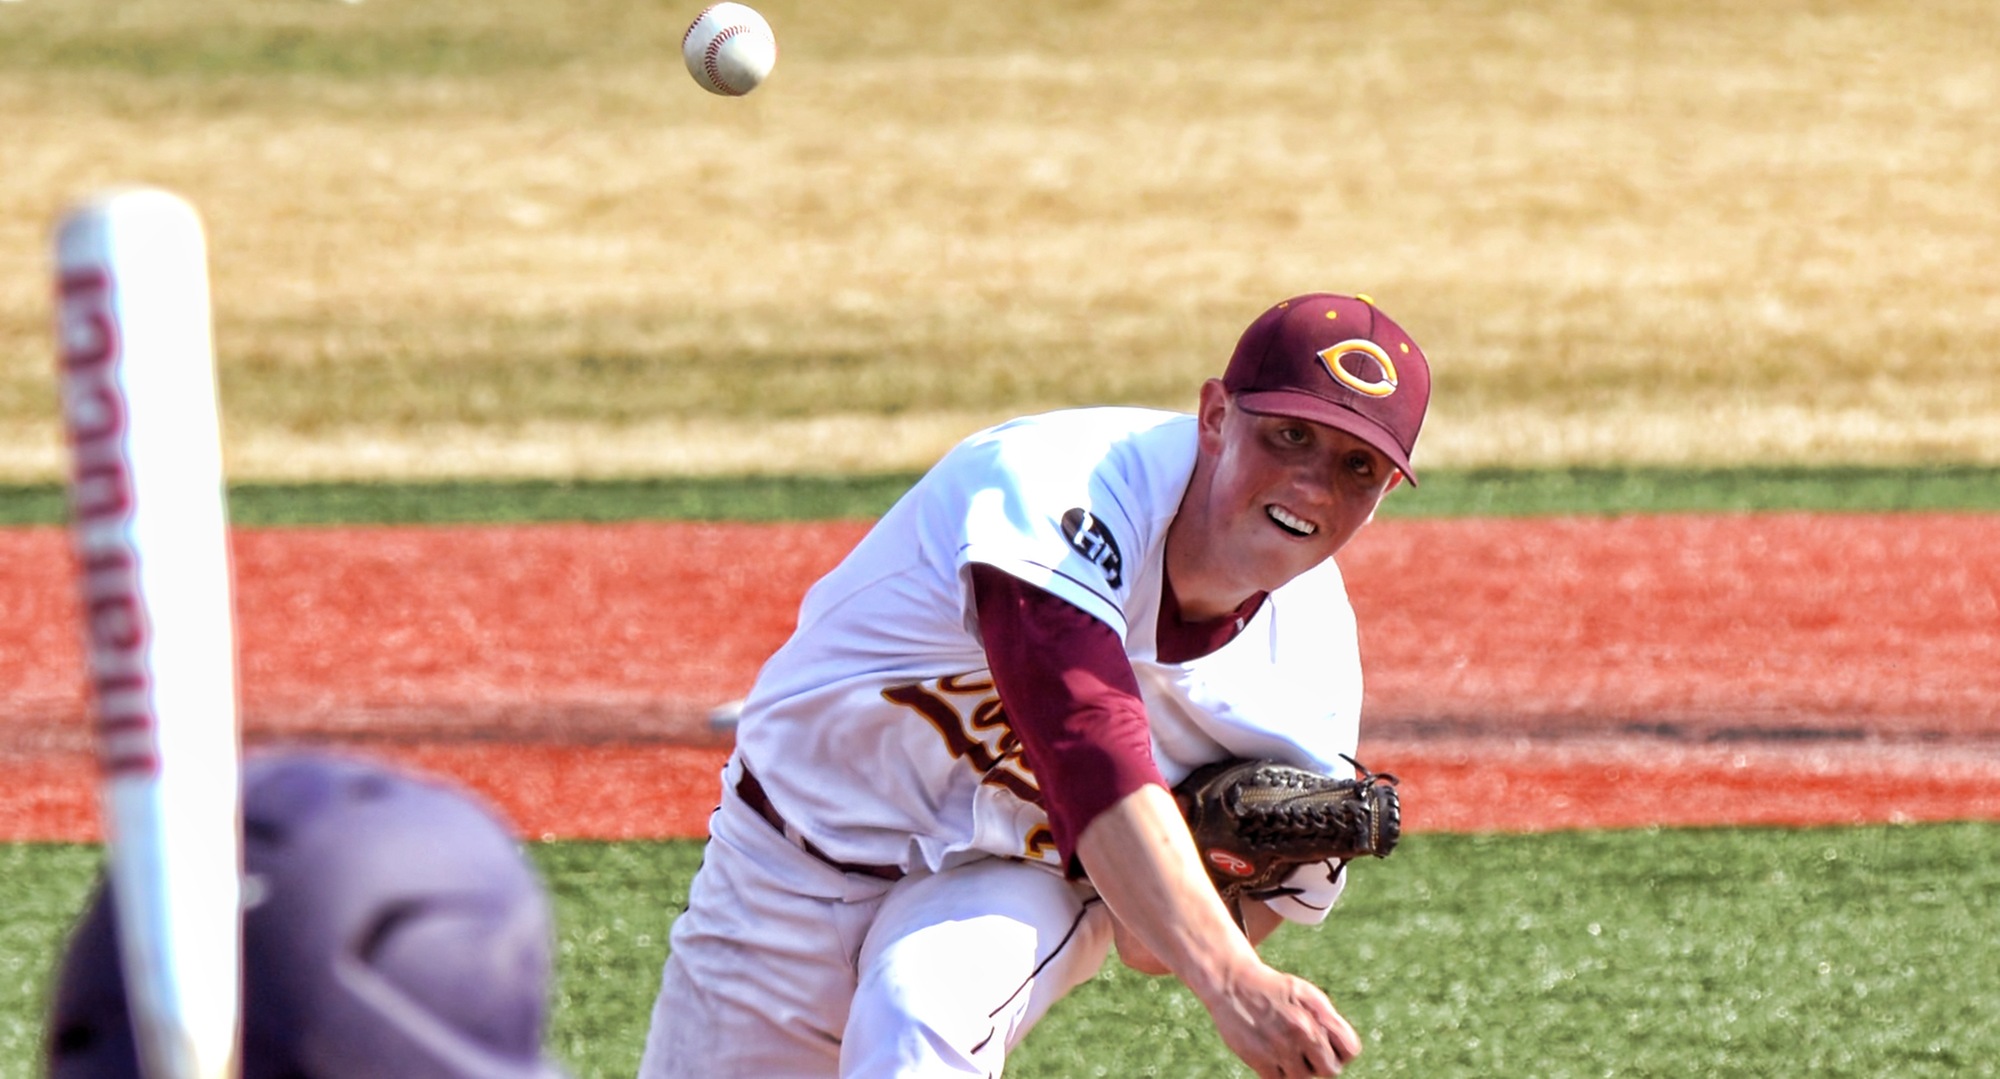 Senior Cole Christensen earned his second straight complete-game win over Hamline as he helped the Cobbers beat the Pipers 6-3 in Game 1.